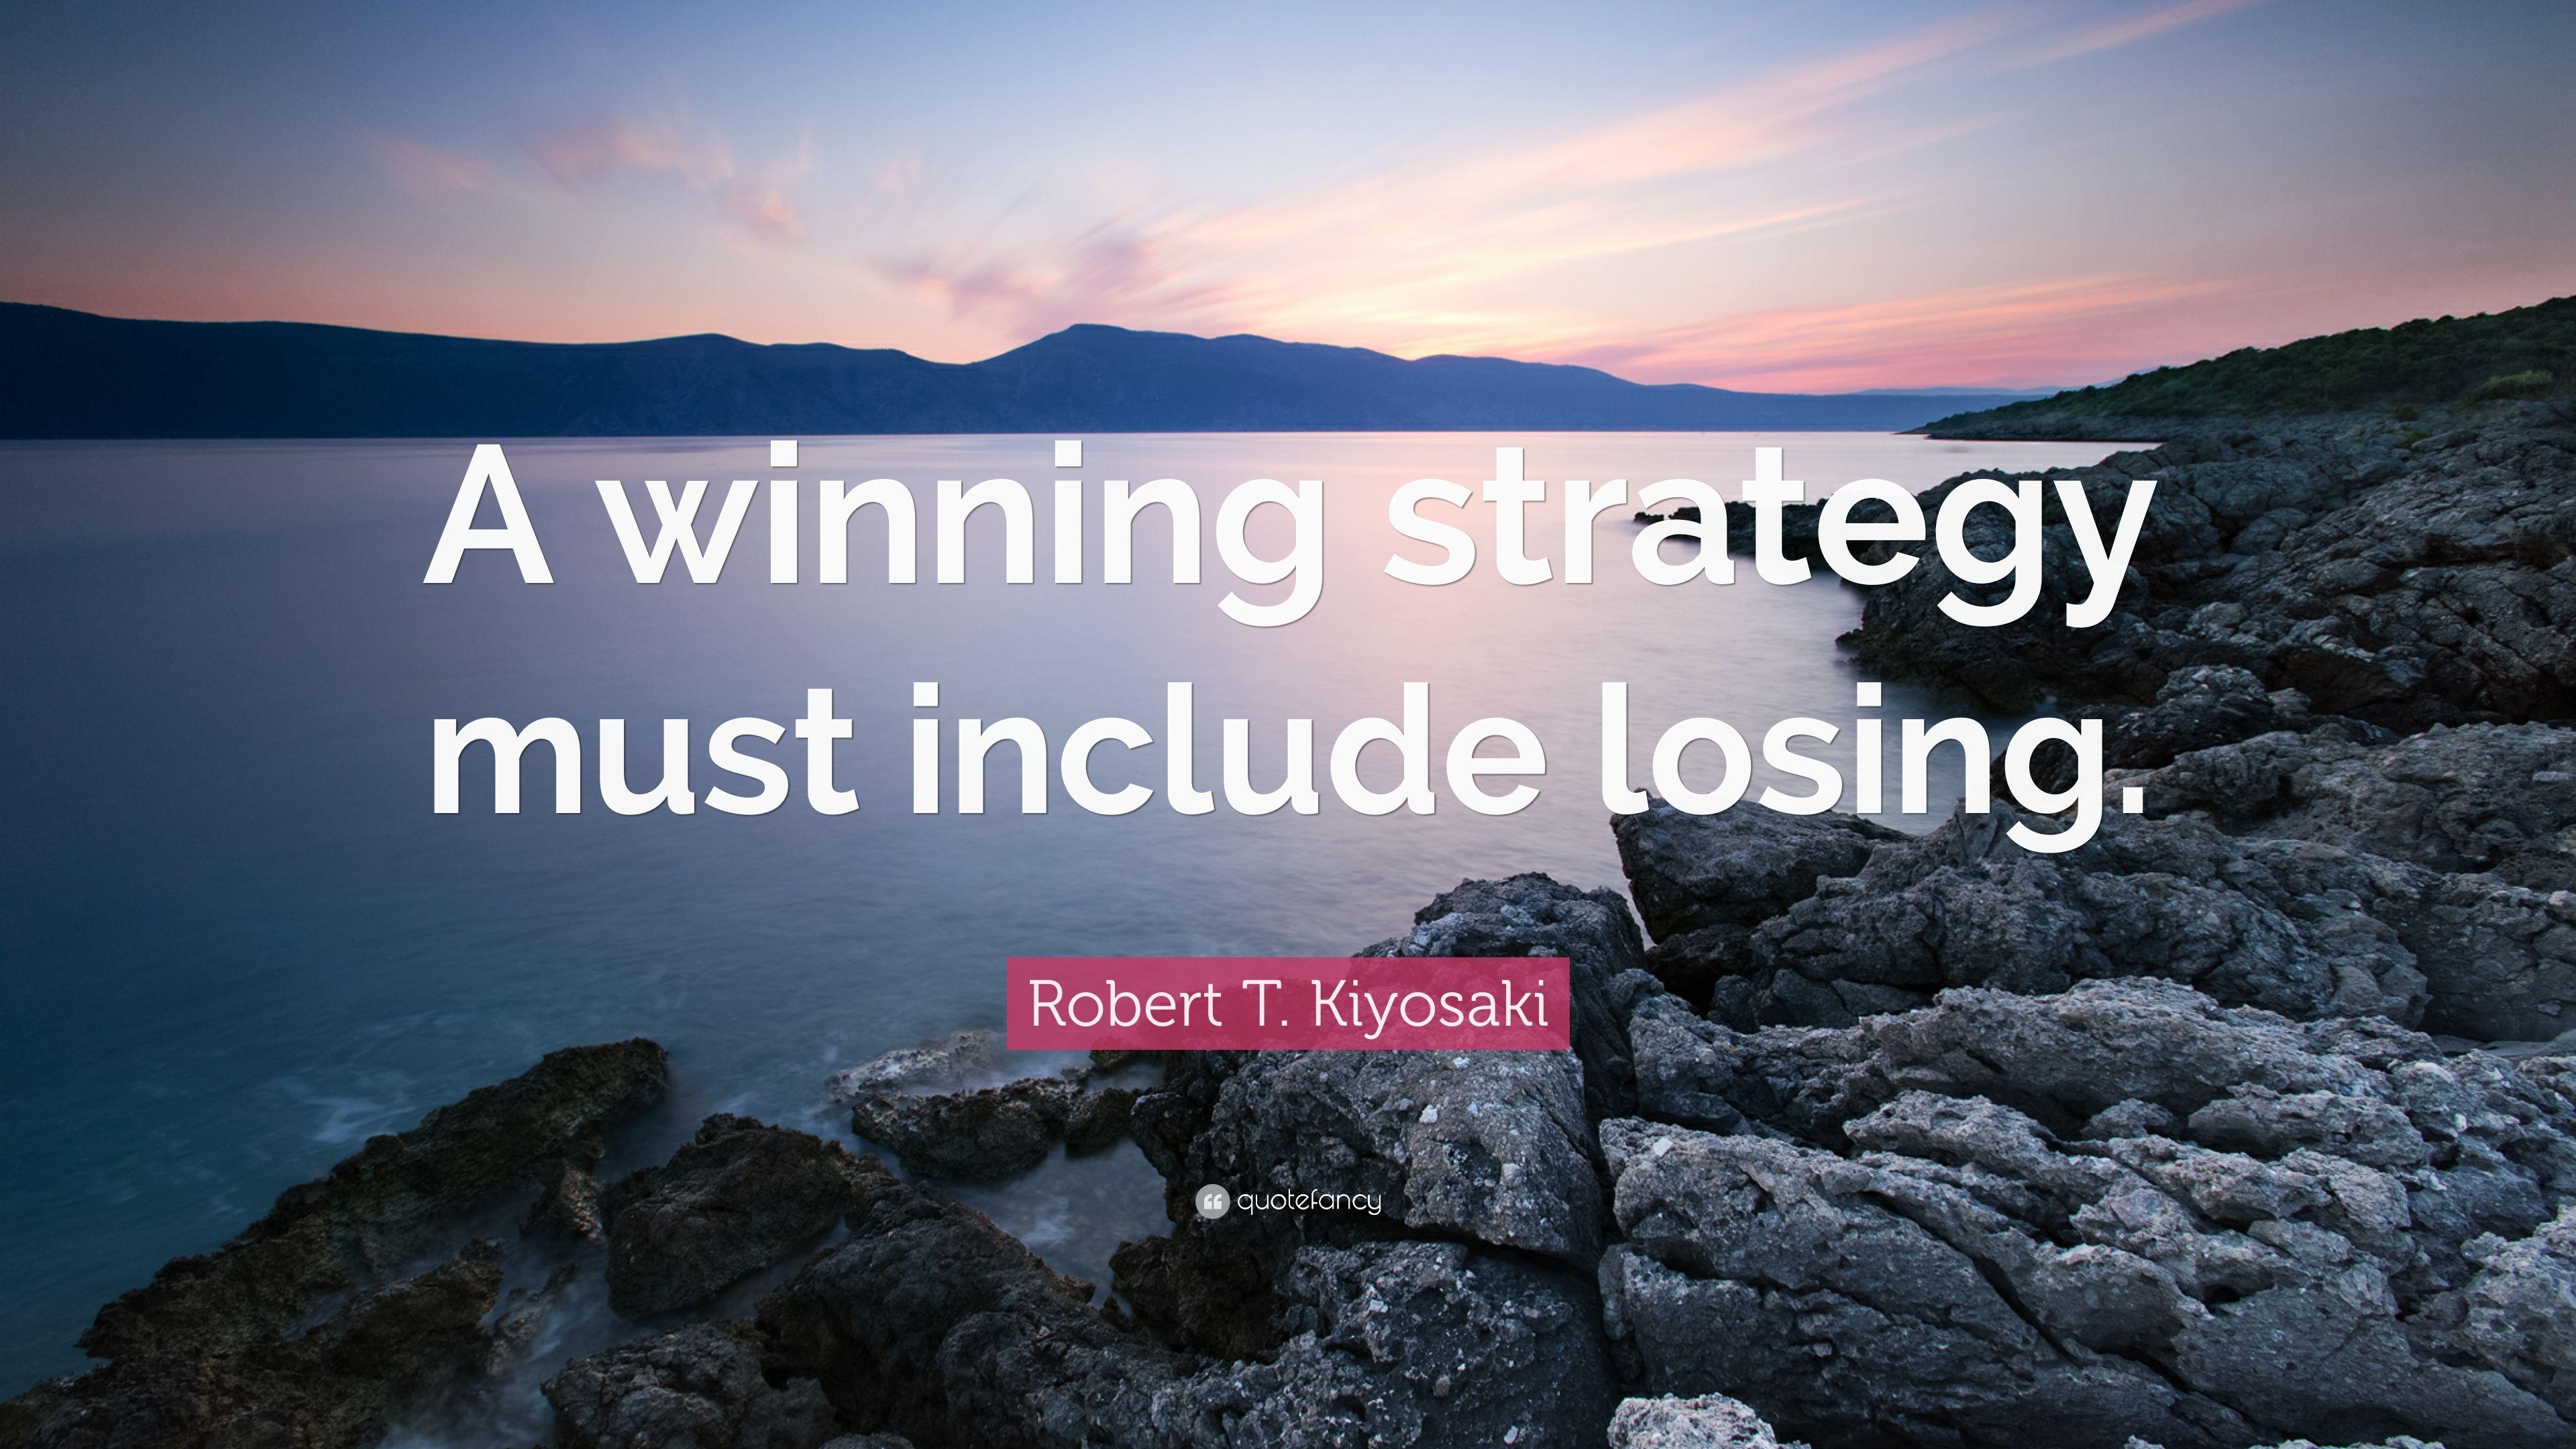 Robert T. Kiyosaki Quote: “A winning strategy must include losing